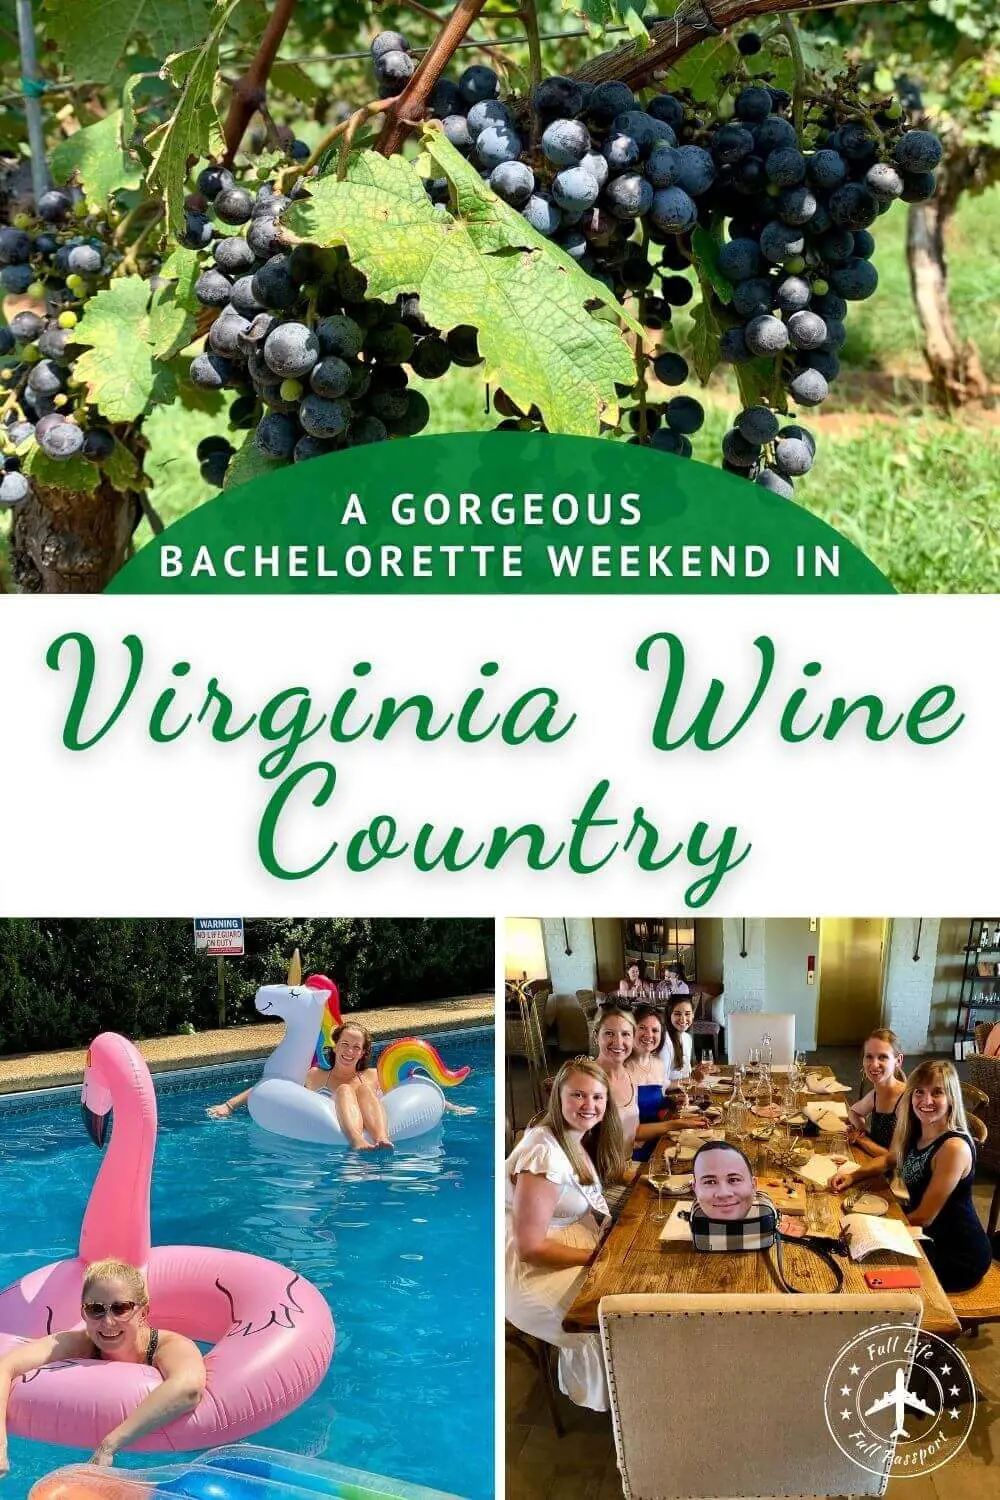 A Gorgeous Bachelorette Weekend in Virginia Wine Country